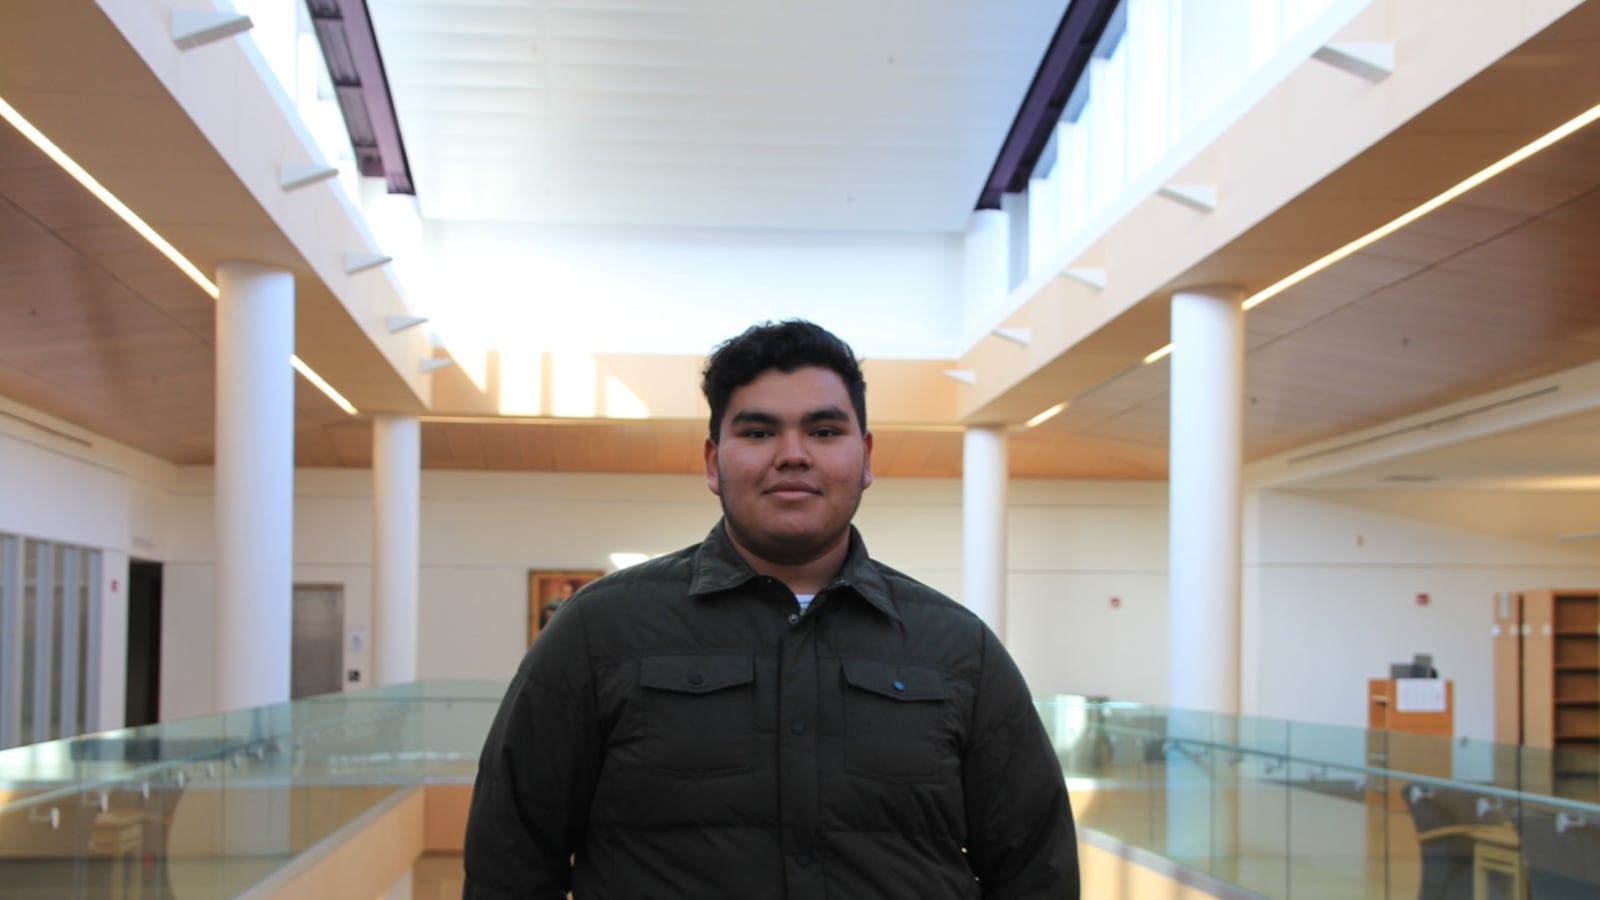 Josue Flores credits the straightforward path of Tennessee Promise for helping him continue his education after graduating in 2016 from Cordova High School in Memphis.